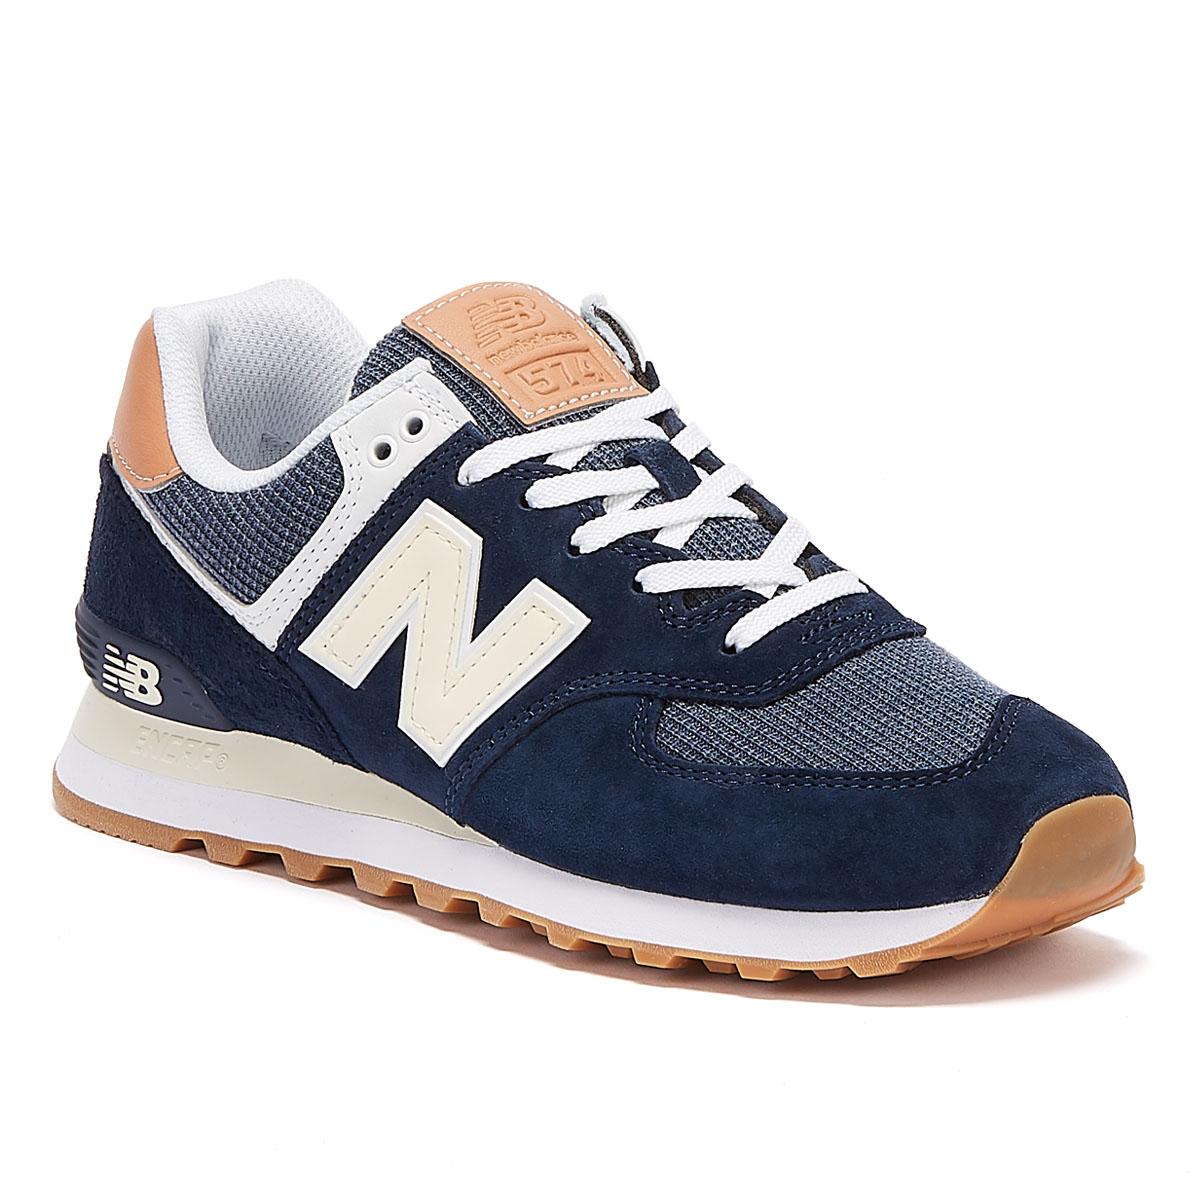 New Balance Rubber 574 Mens Navy / Tan Trainers in Blue for Men - Lyst